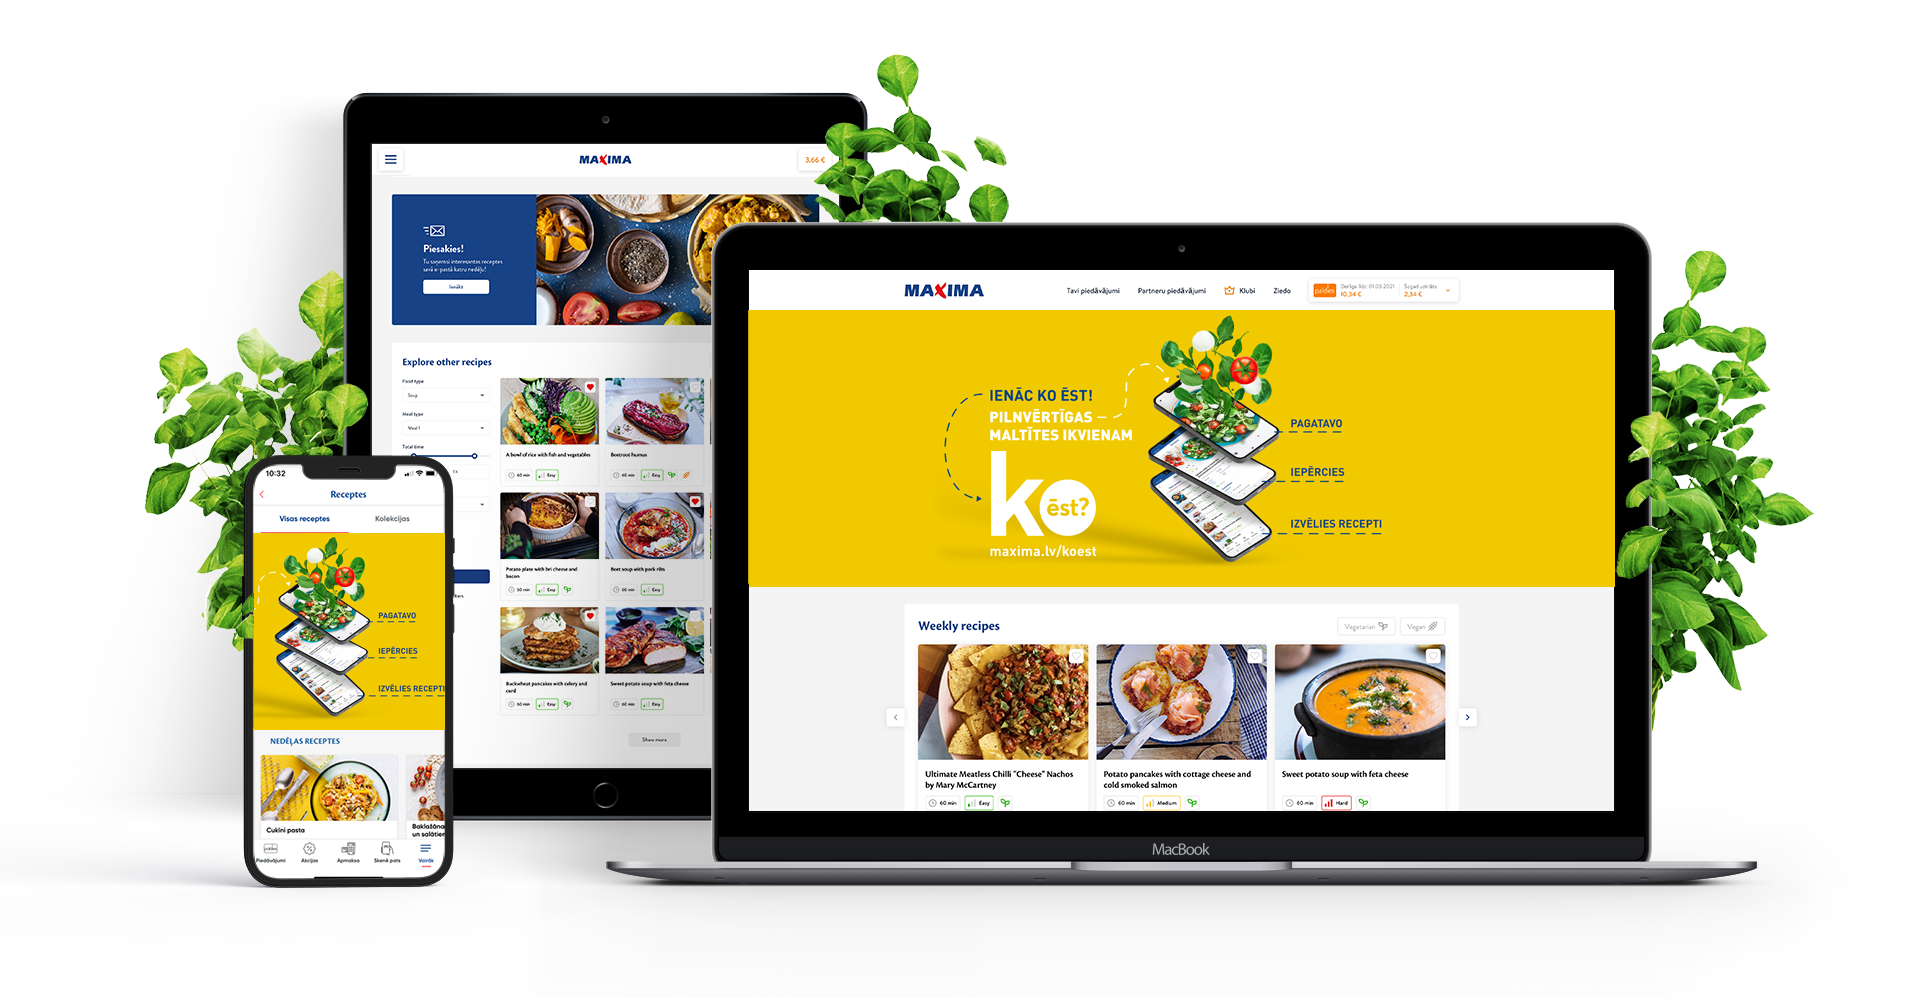 Explore recipes from everywhere